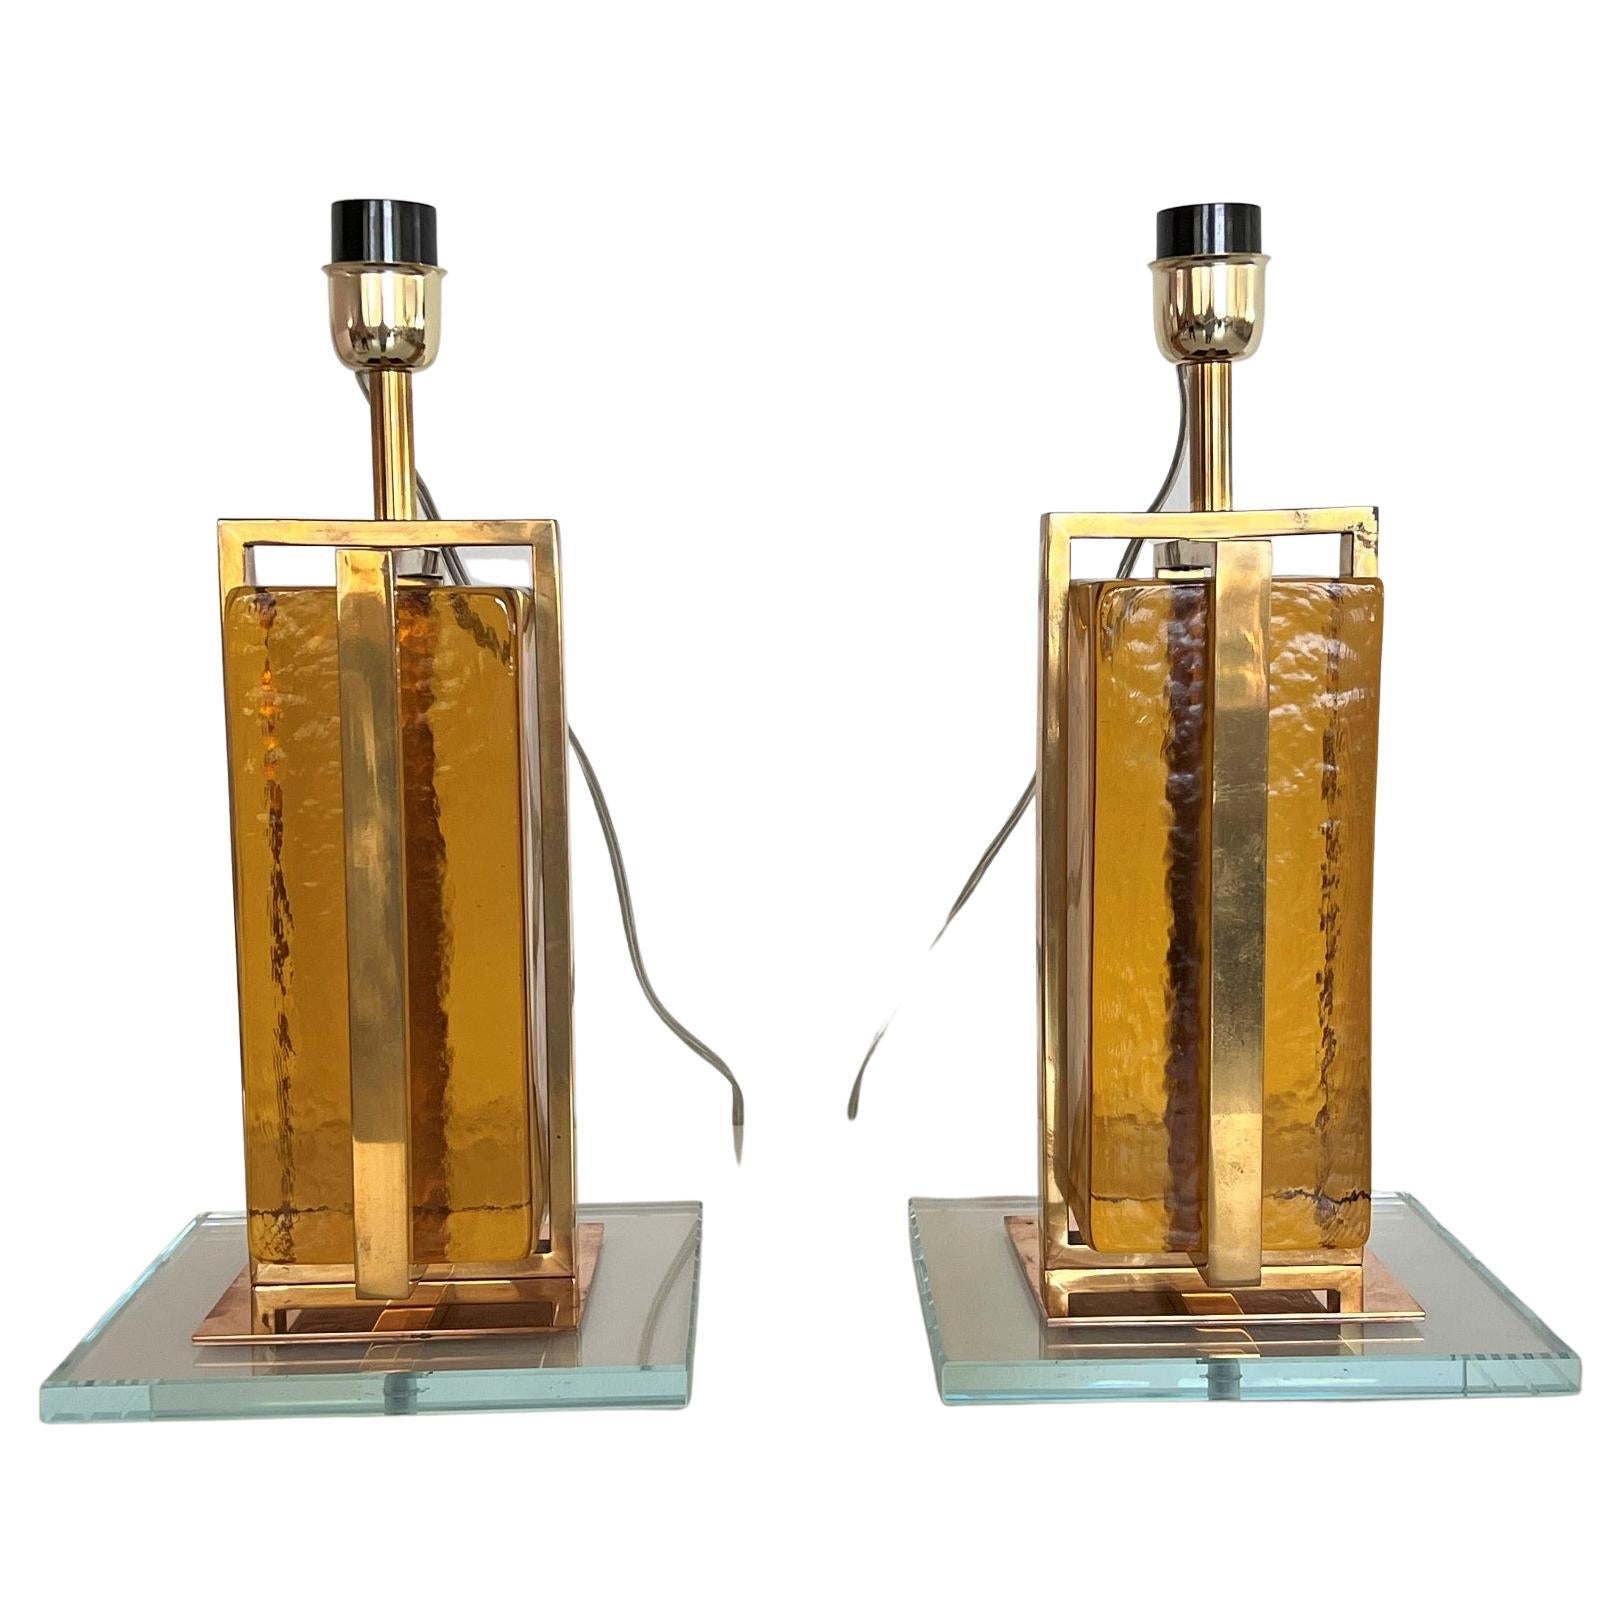 Murano Mordern Glass Block and Brass Table Lamps